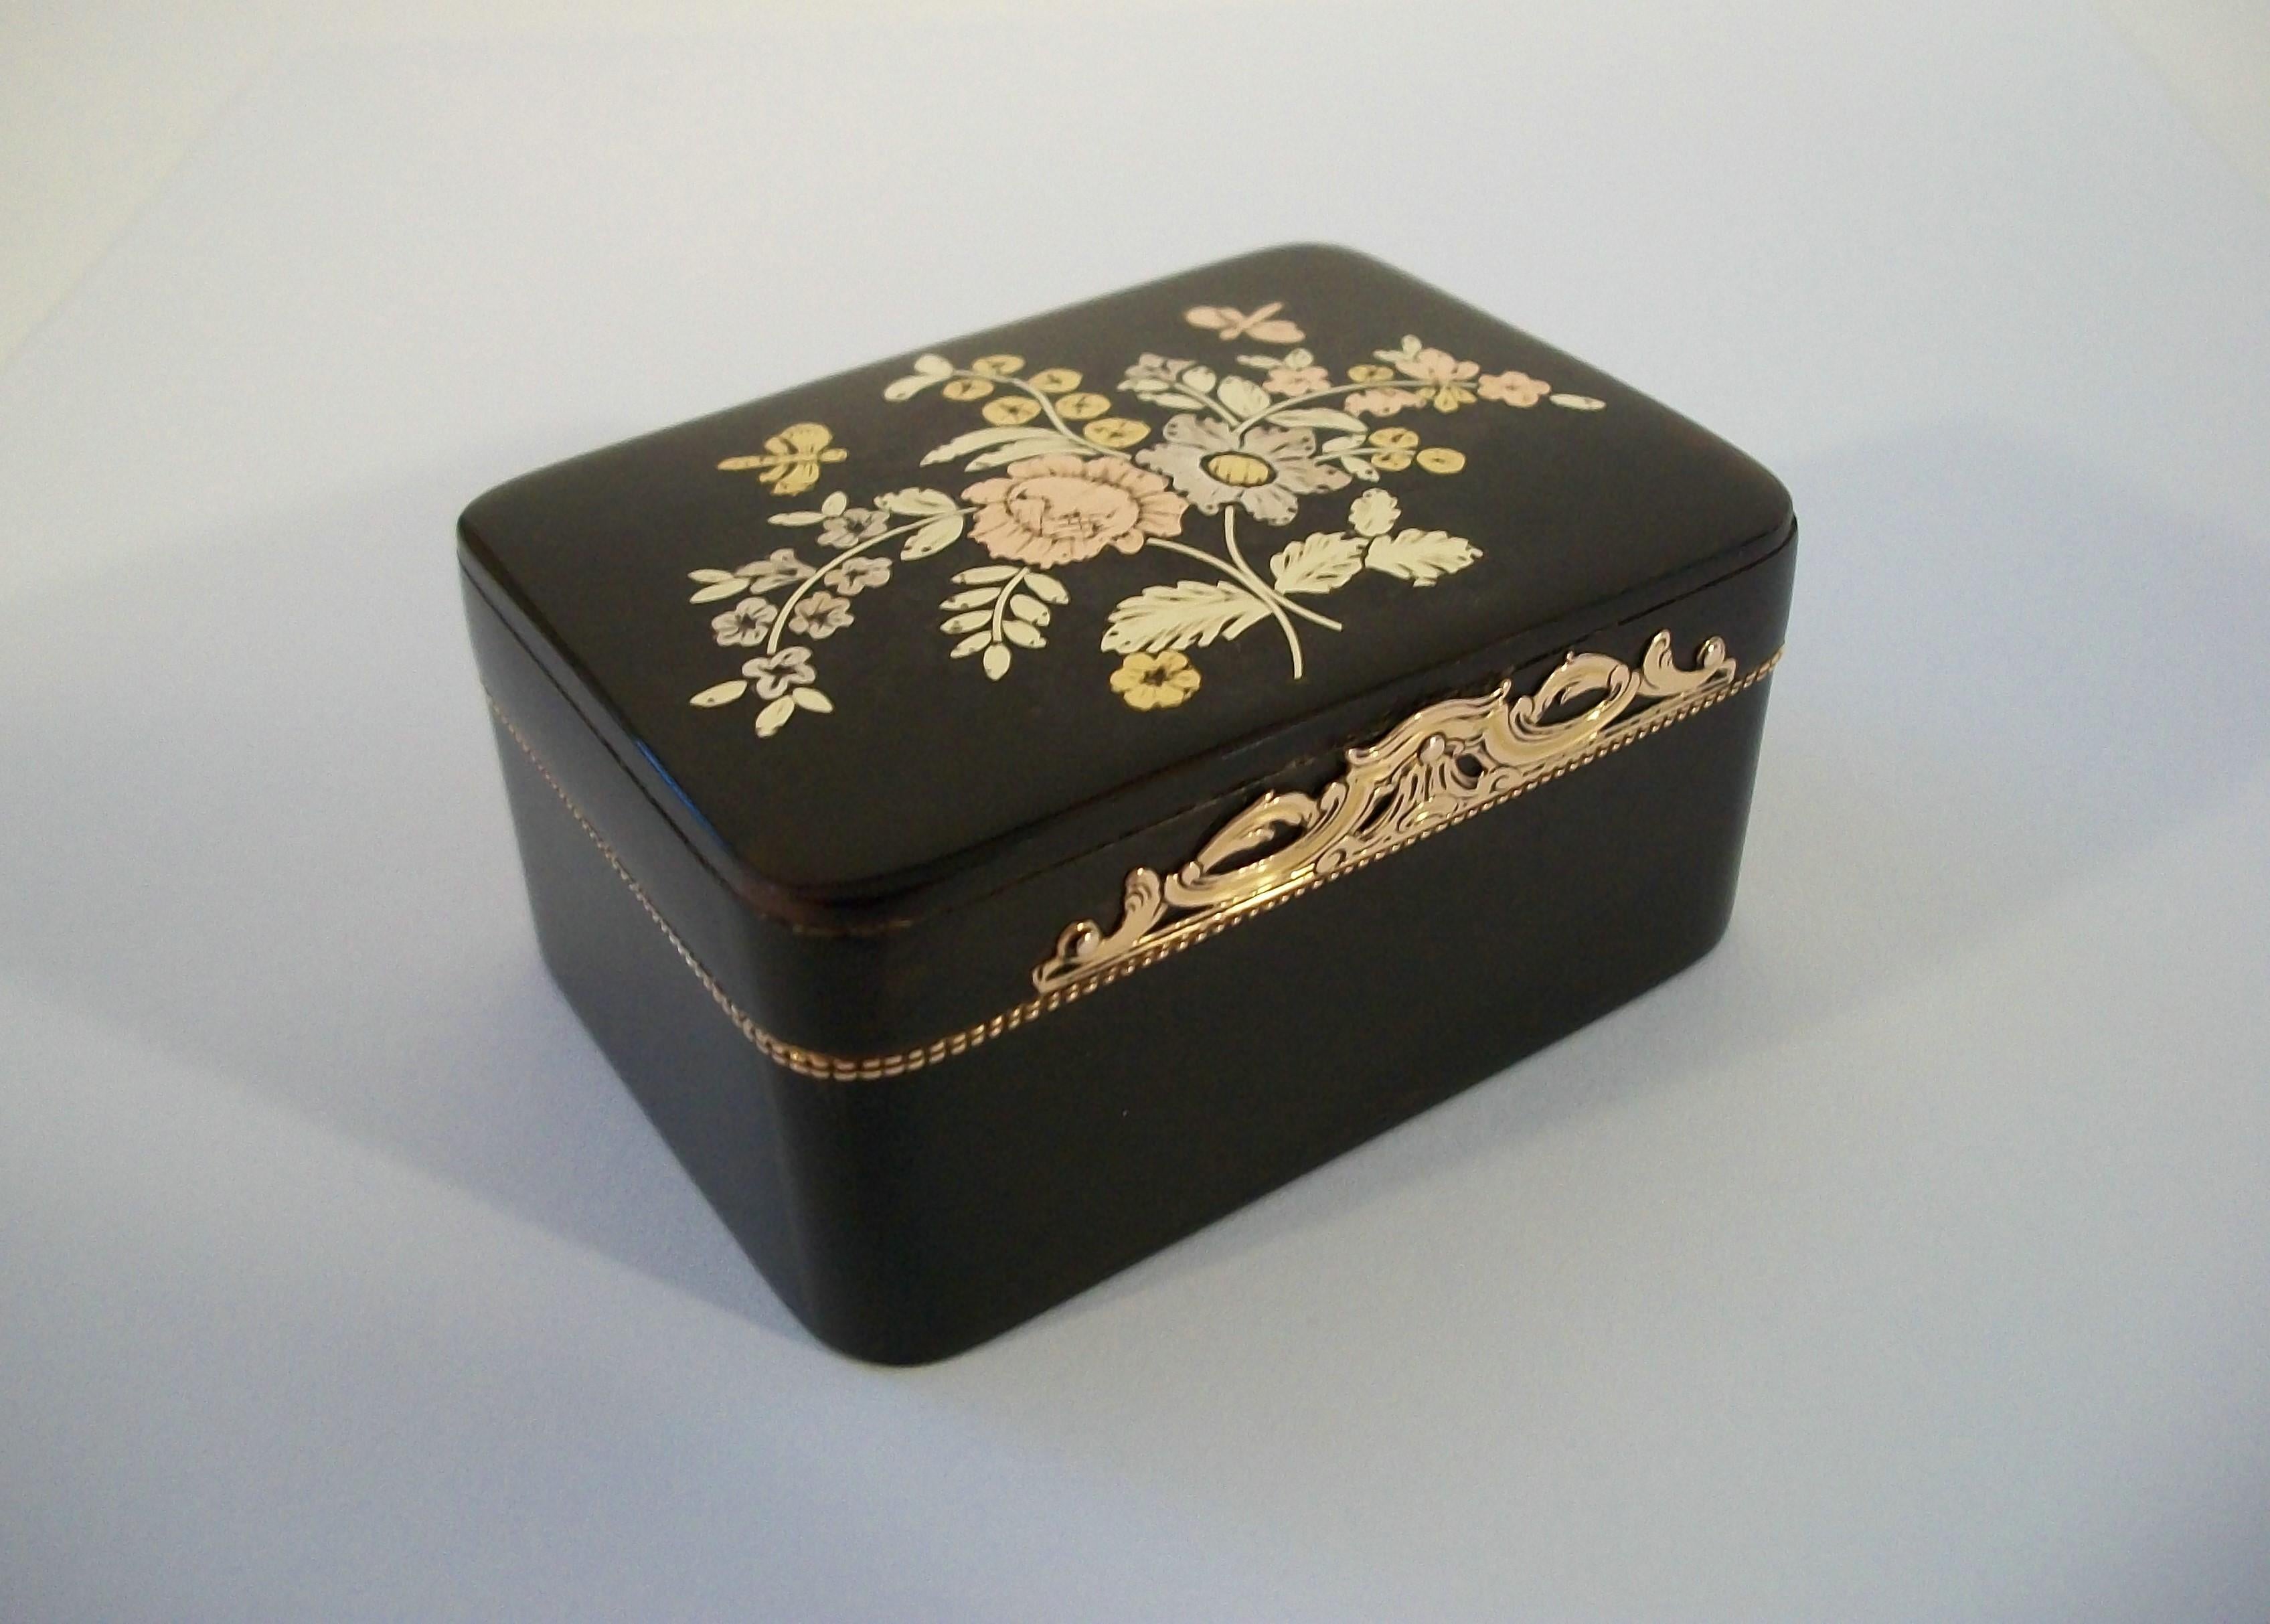 Exceptional Louis XV vari-color gold and black enamel snuff box - featuring a bouquet of flowers with two attending butterflies to the top (all in yellow, white, rose and green gold) - yellow gold thumbpiece and fittings with scalloped edges - rose